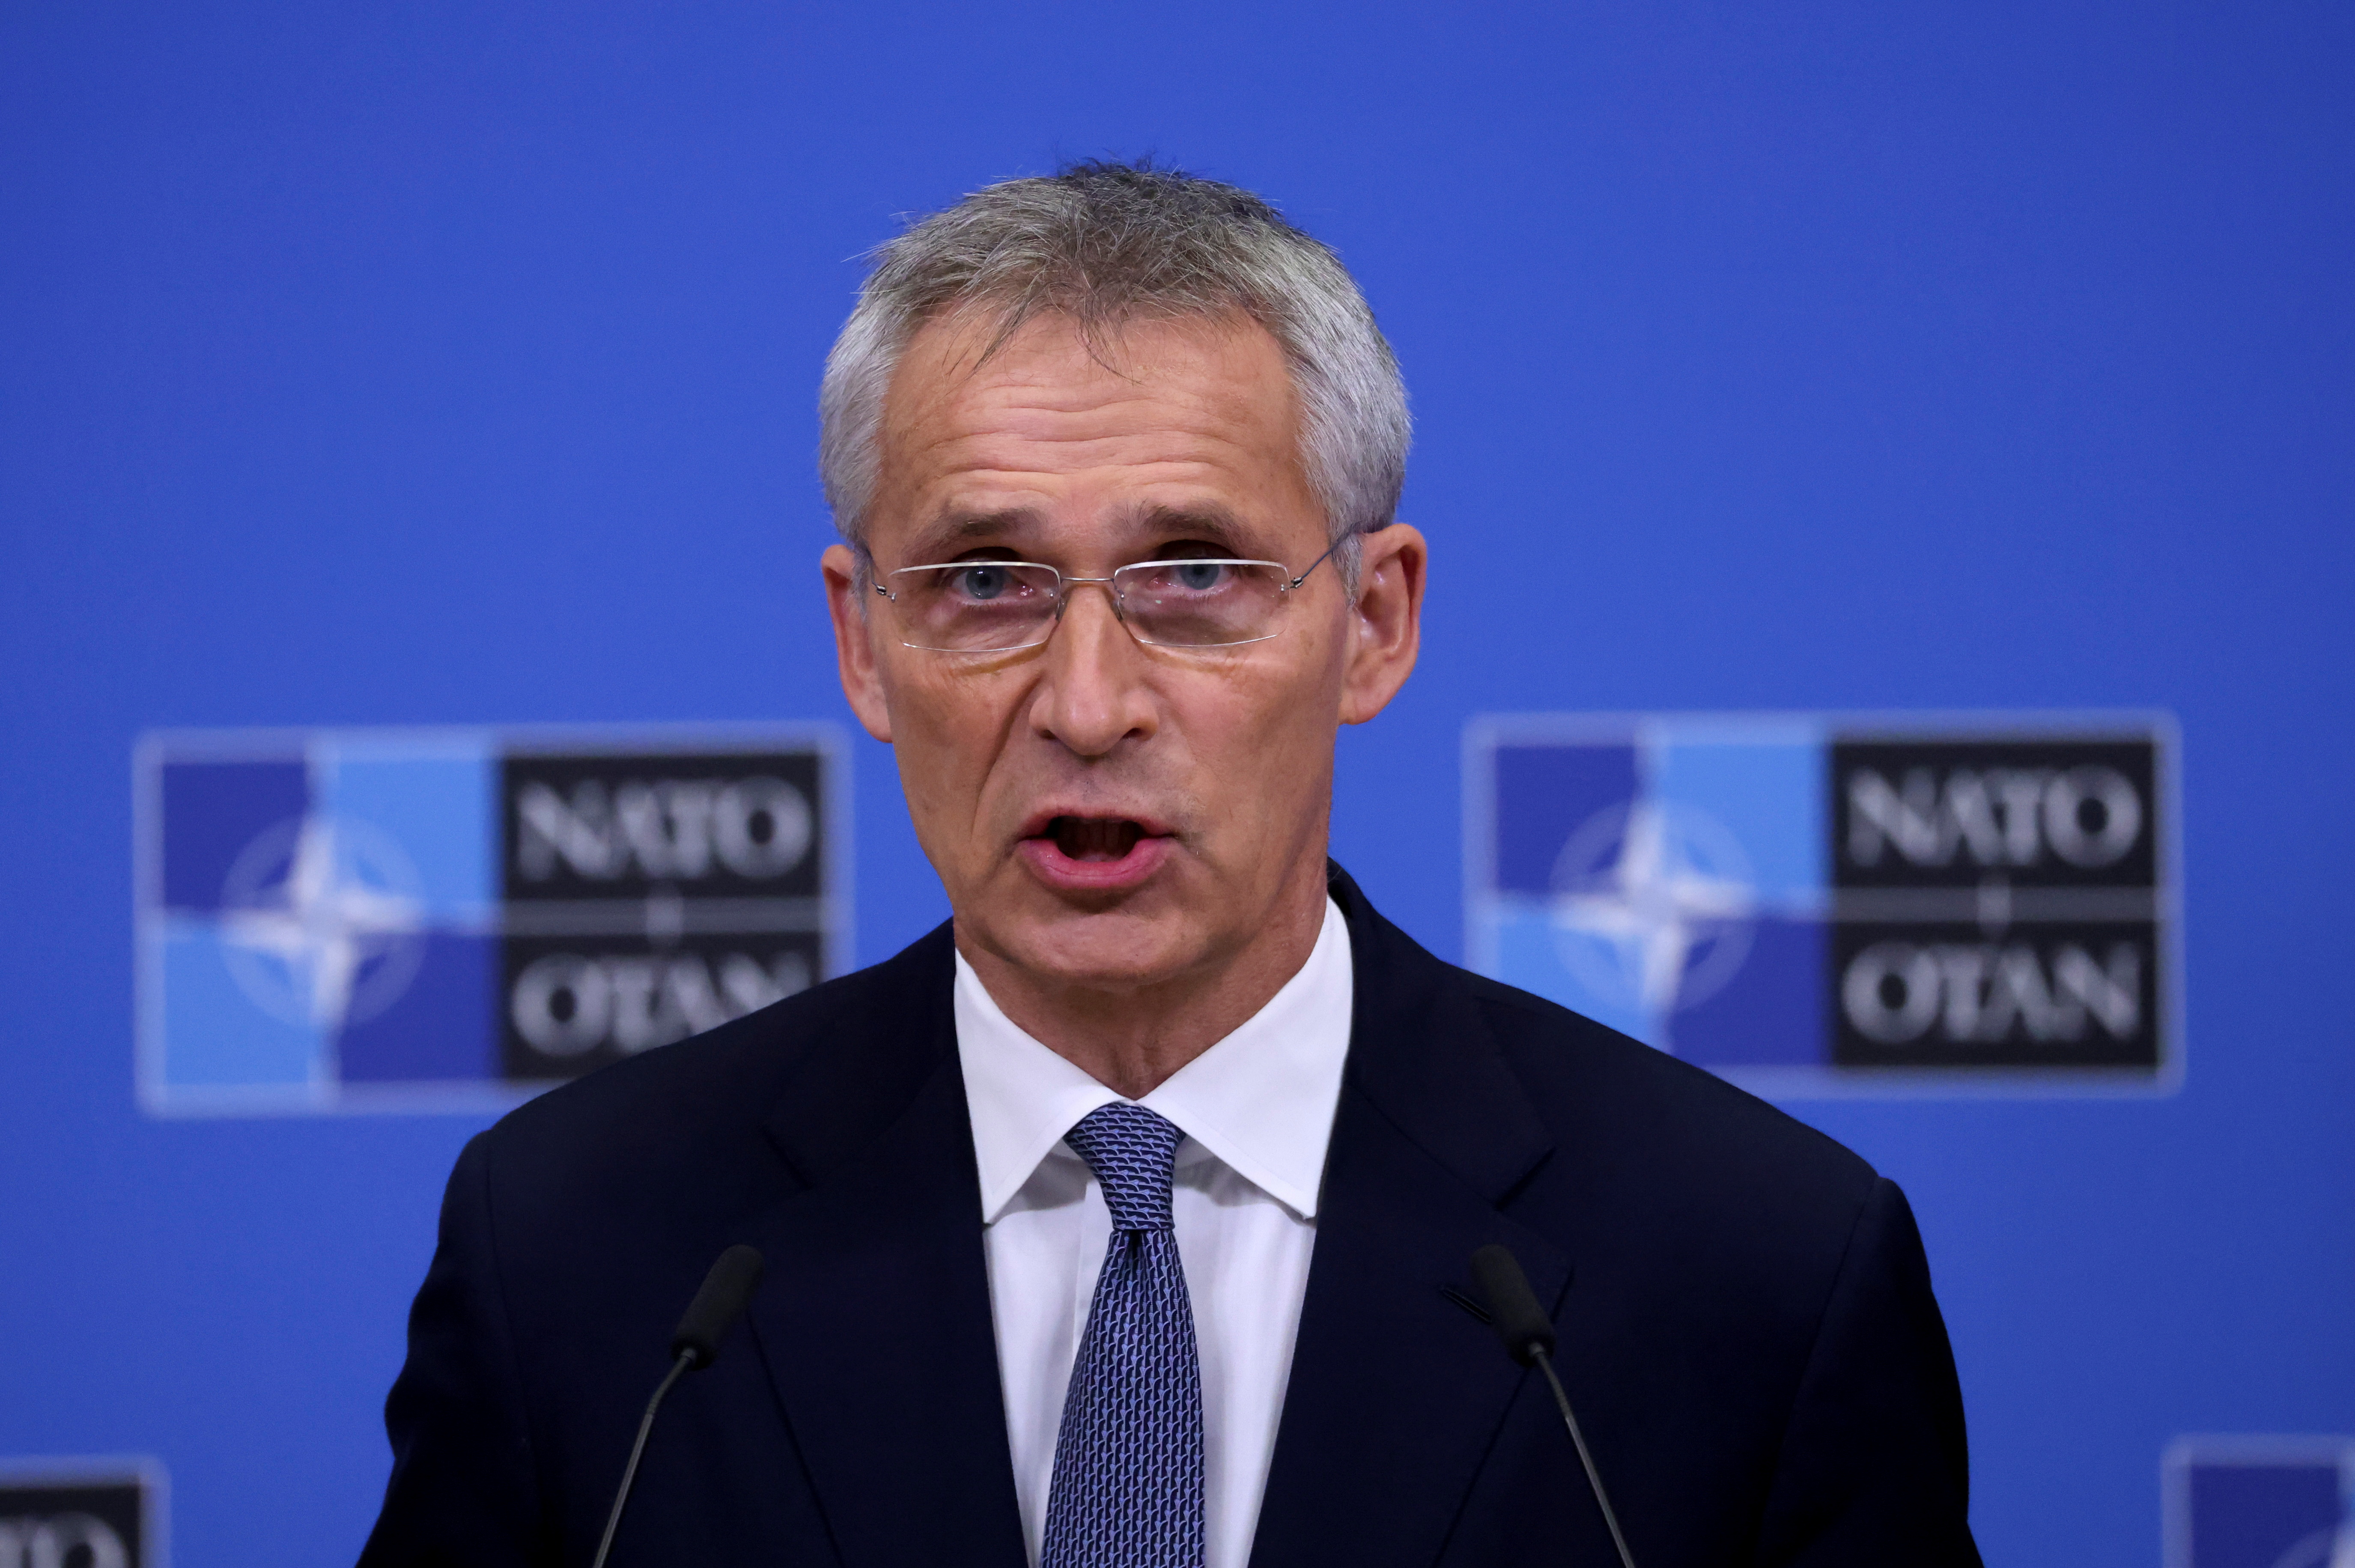 NATO Secretary General Jens Stoltenberg speaks during a news conference ahead of a meeting of NATO defence ministers at the alliance's headquarters in Brussels, Belgium October 20, 2021. REUTERS/Yves Herman